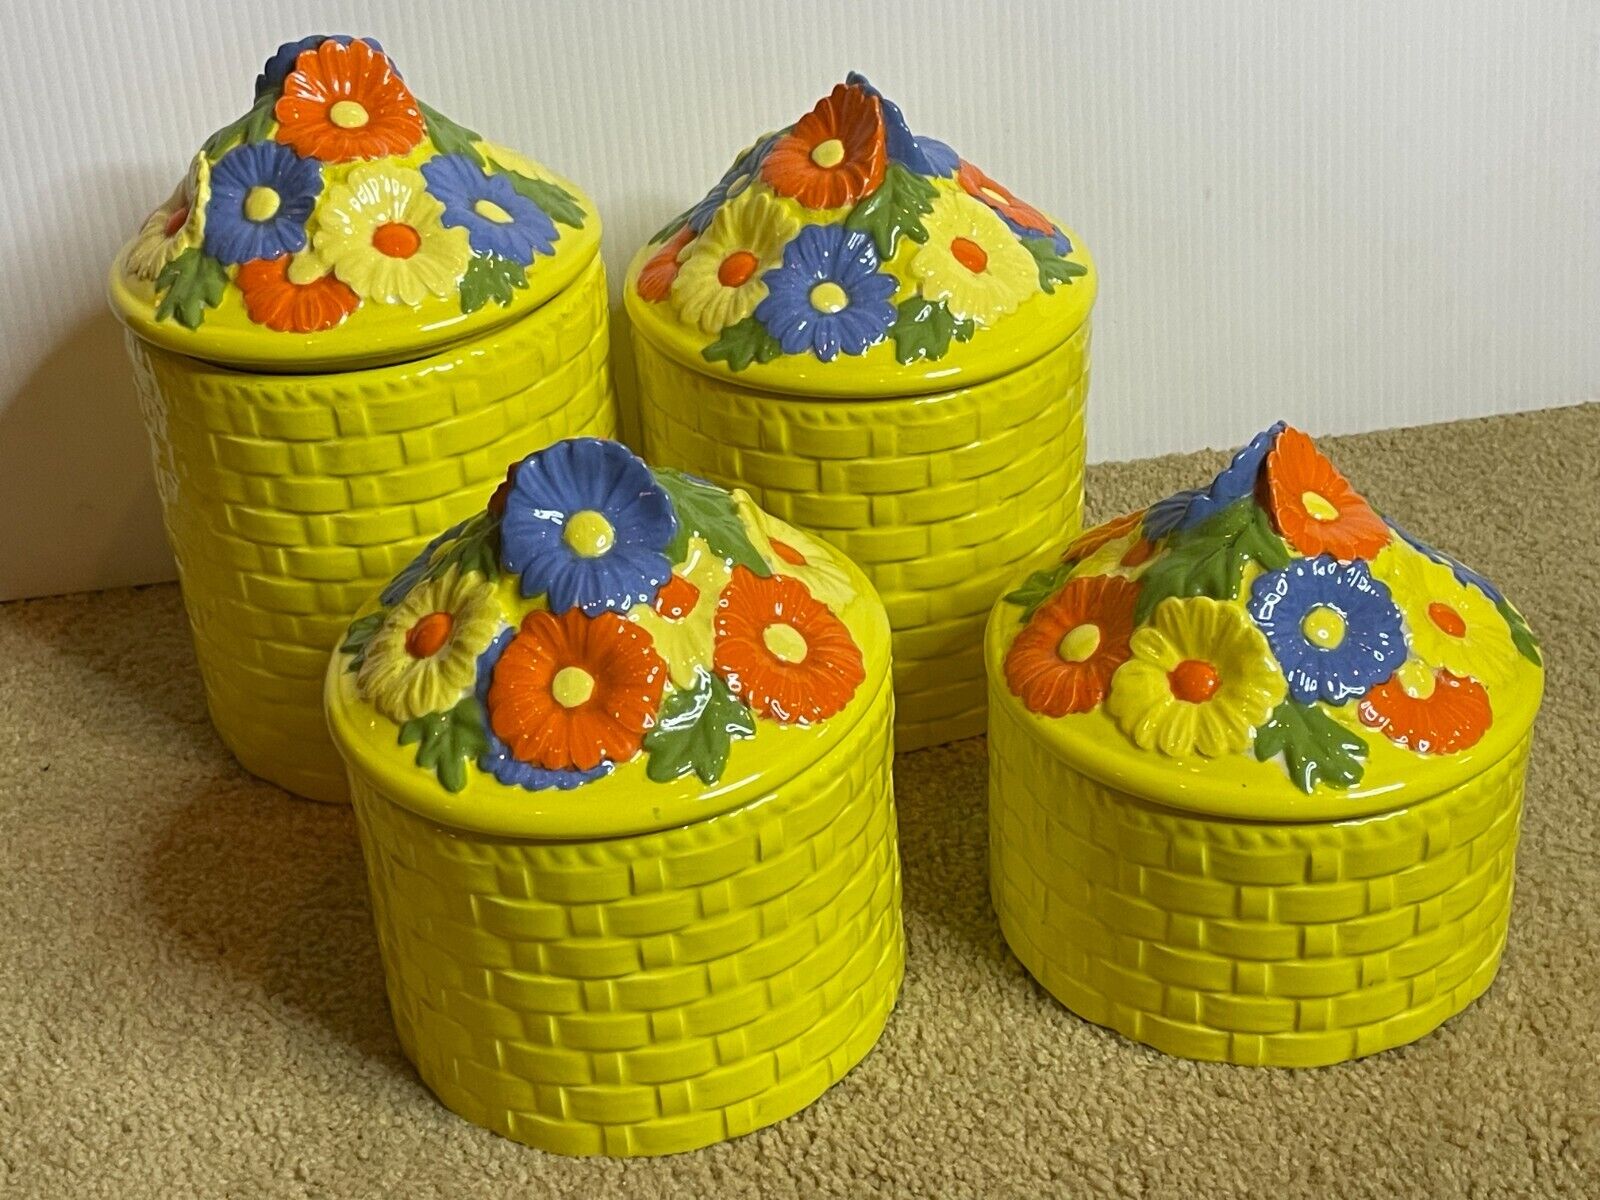 Vintage 70s Set 4 Kitschy Daisy Ceramic Mold Canisters Set Basketweave Yellow